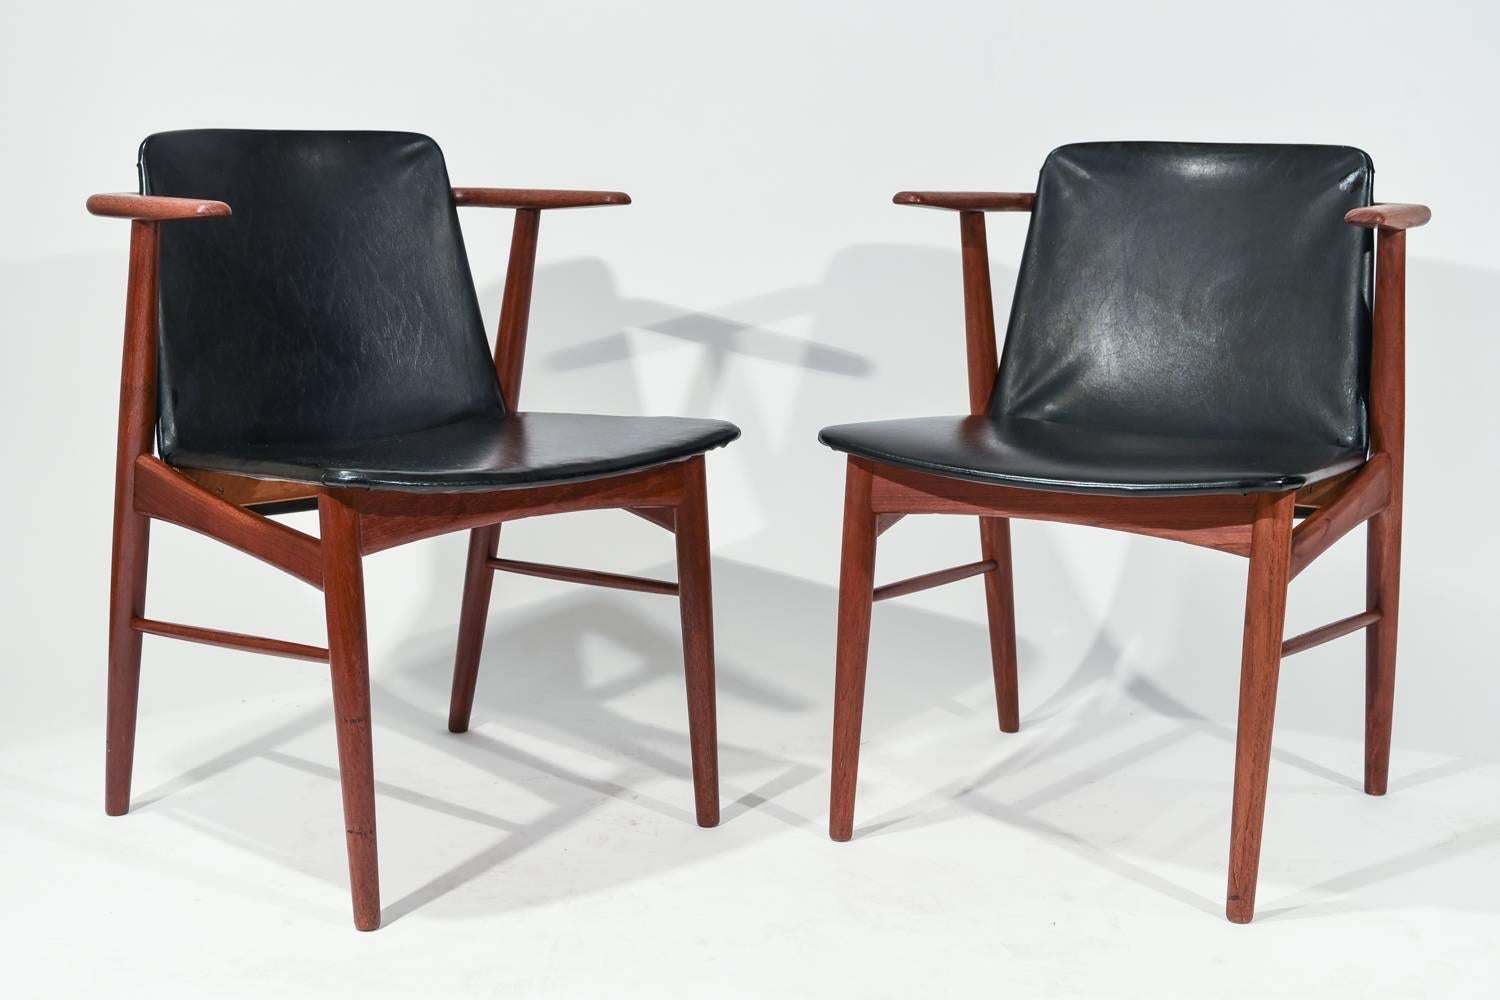 This fine pair of armchairs was designed by Hans Olsen for manufacturer N.A. Jorgensen, also know as Bramin, in 1955. They feature great teak frames.